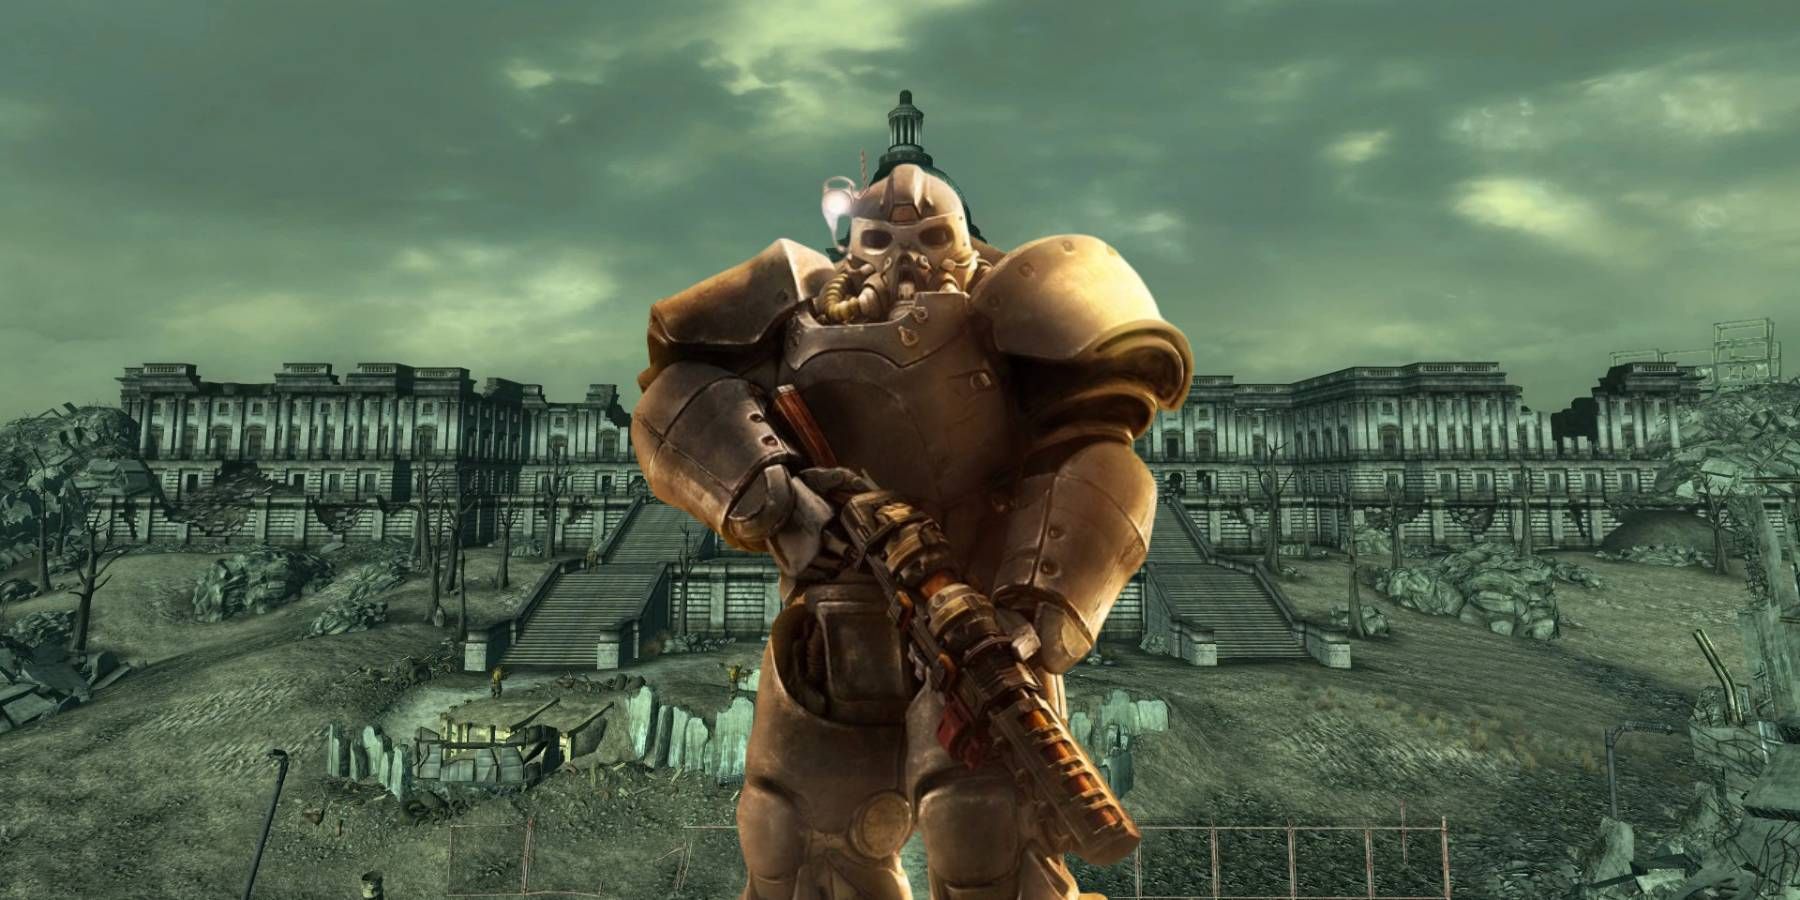 A wastelander in power armor from Fallout 76 in front of the Capitol Building as seen in Fallout 3